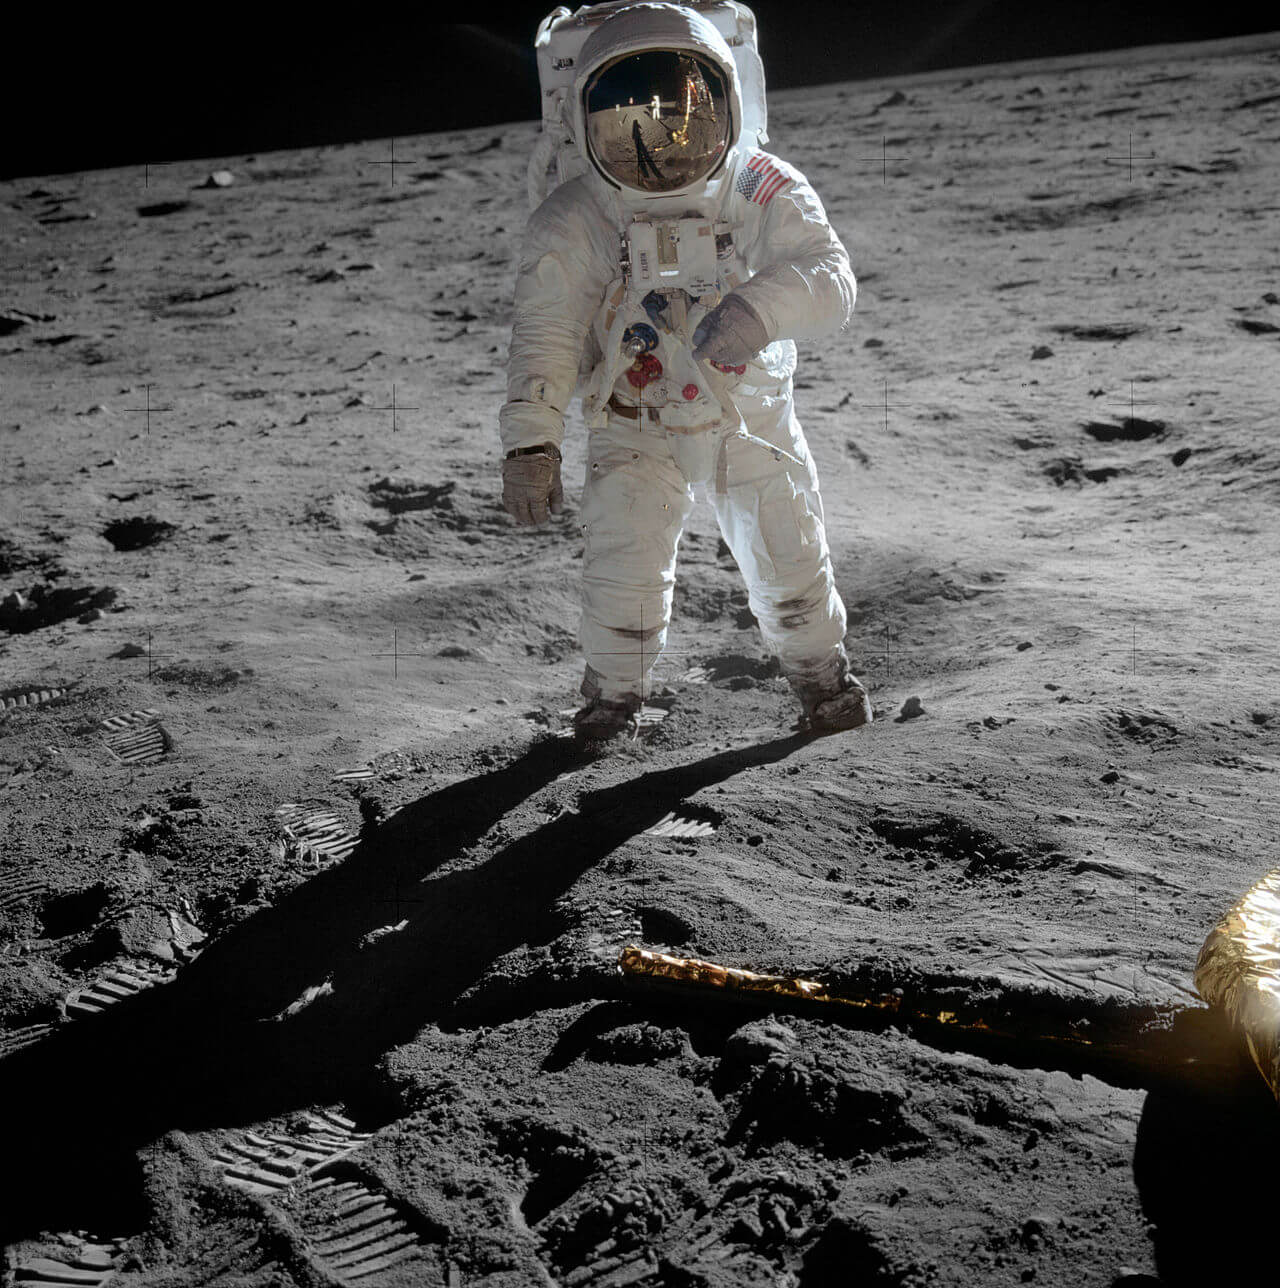 Photo of Buzz Aldrin on the moon taken by Neil Armstrong who is reflected in Aldrin's visor